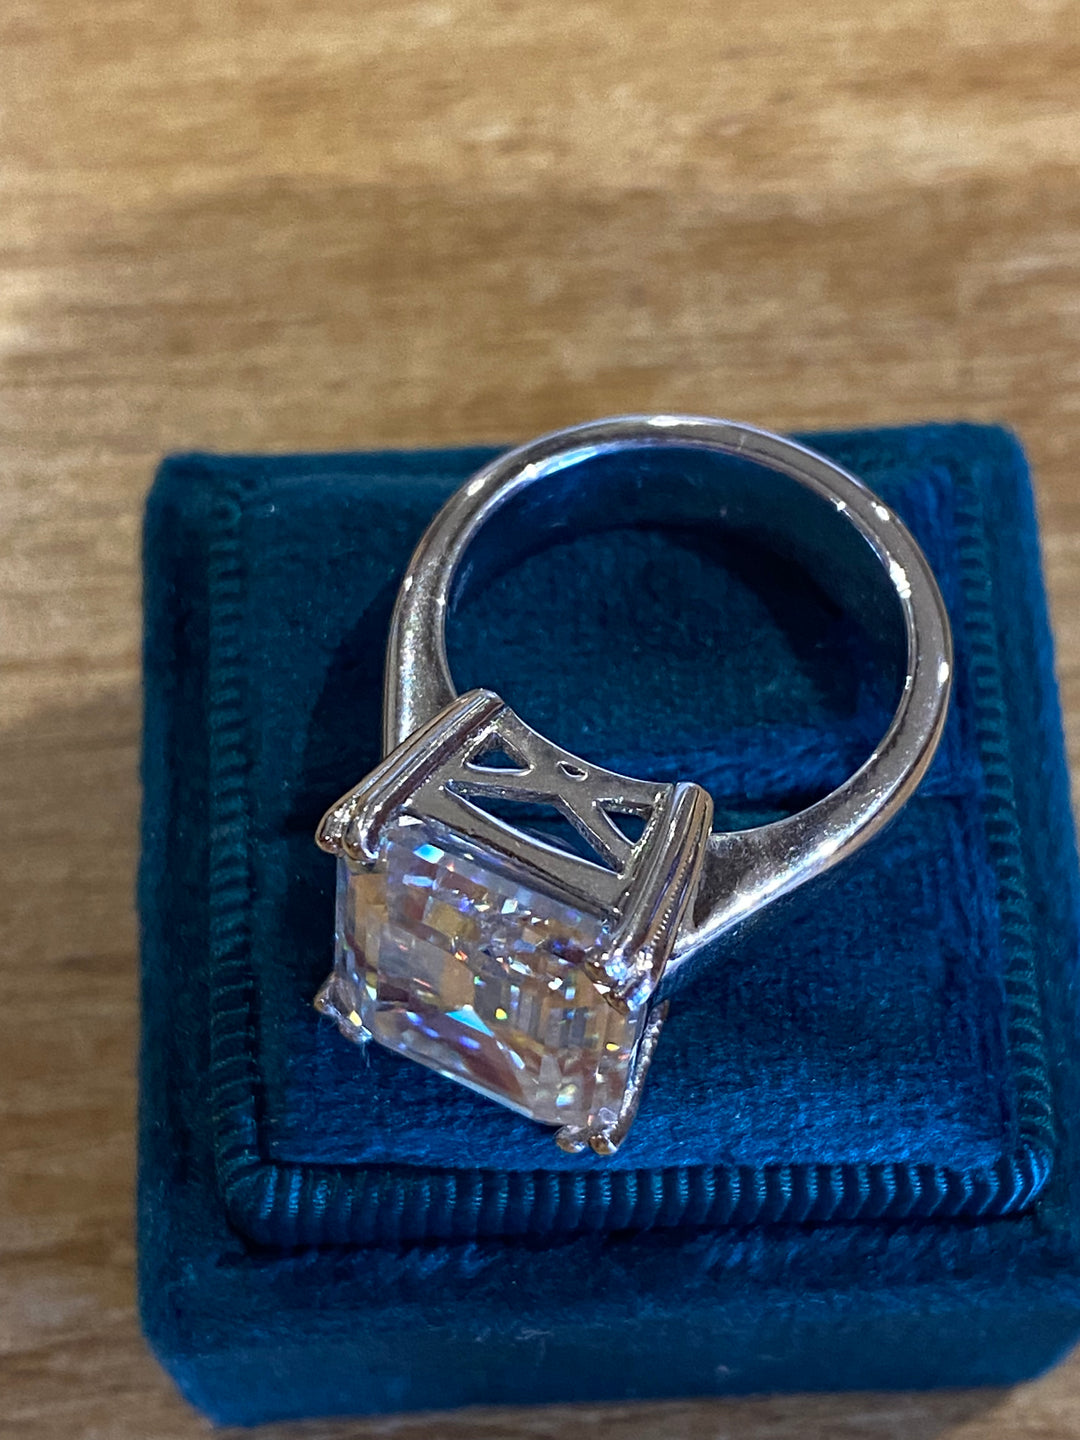 10.69 Carat Emerald Cut Double Claw Moissanite Engagement Cocktail Ring Katherine James Jewellery 